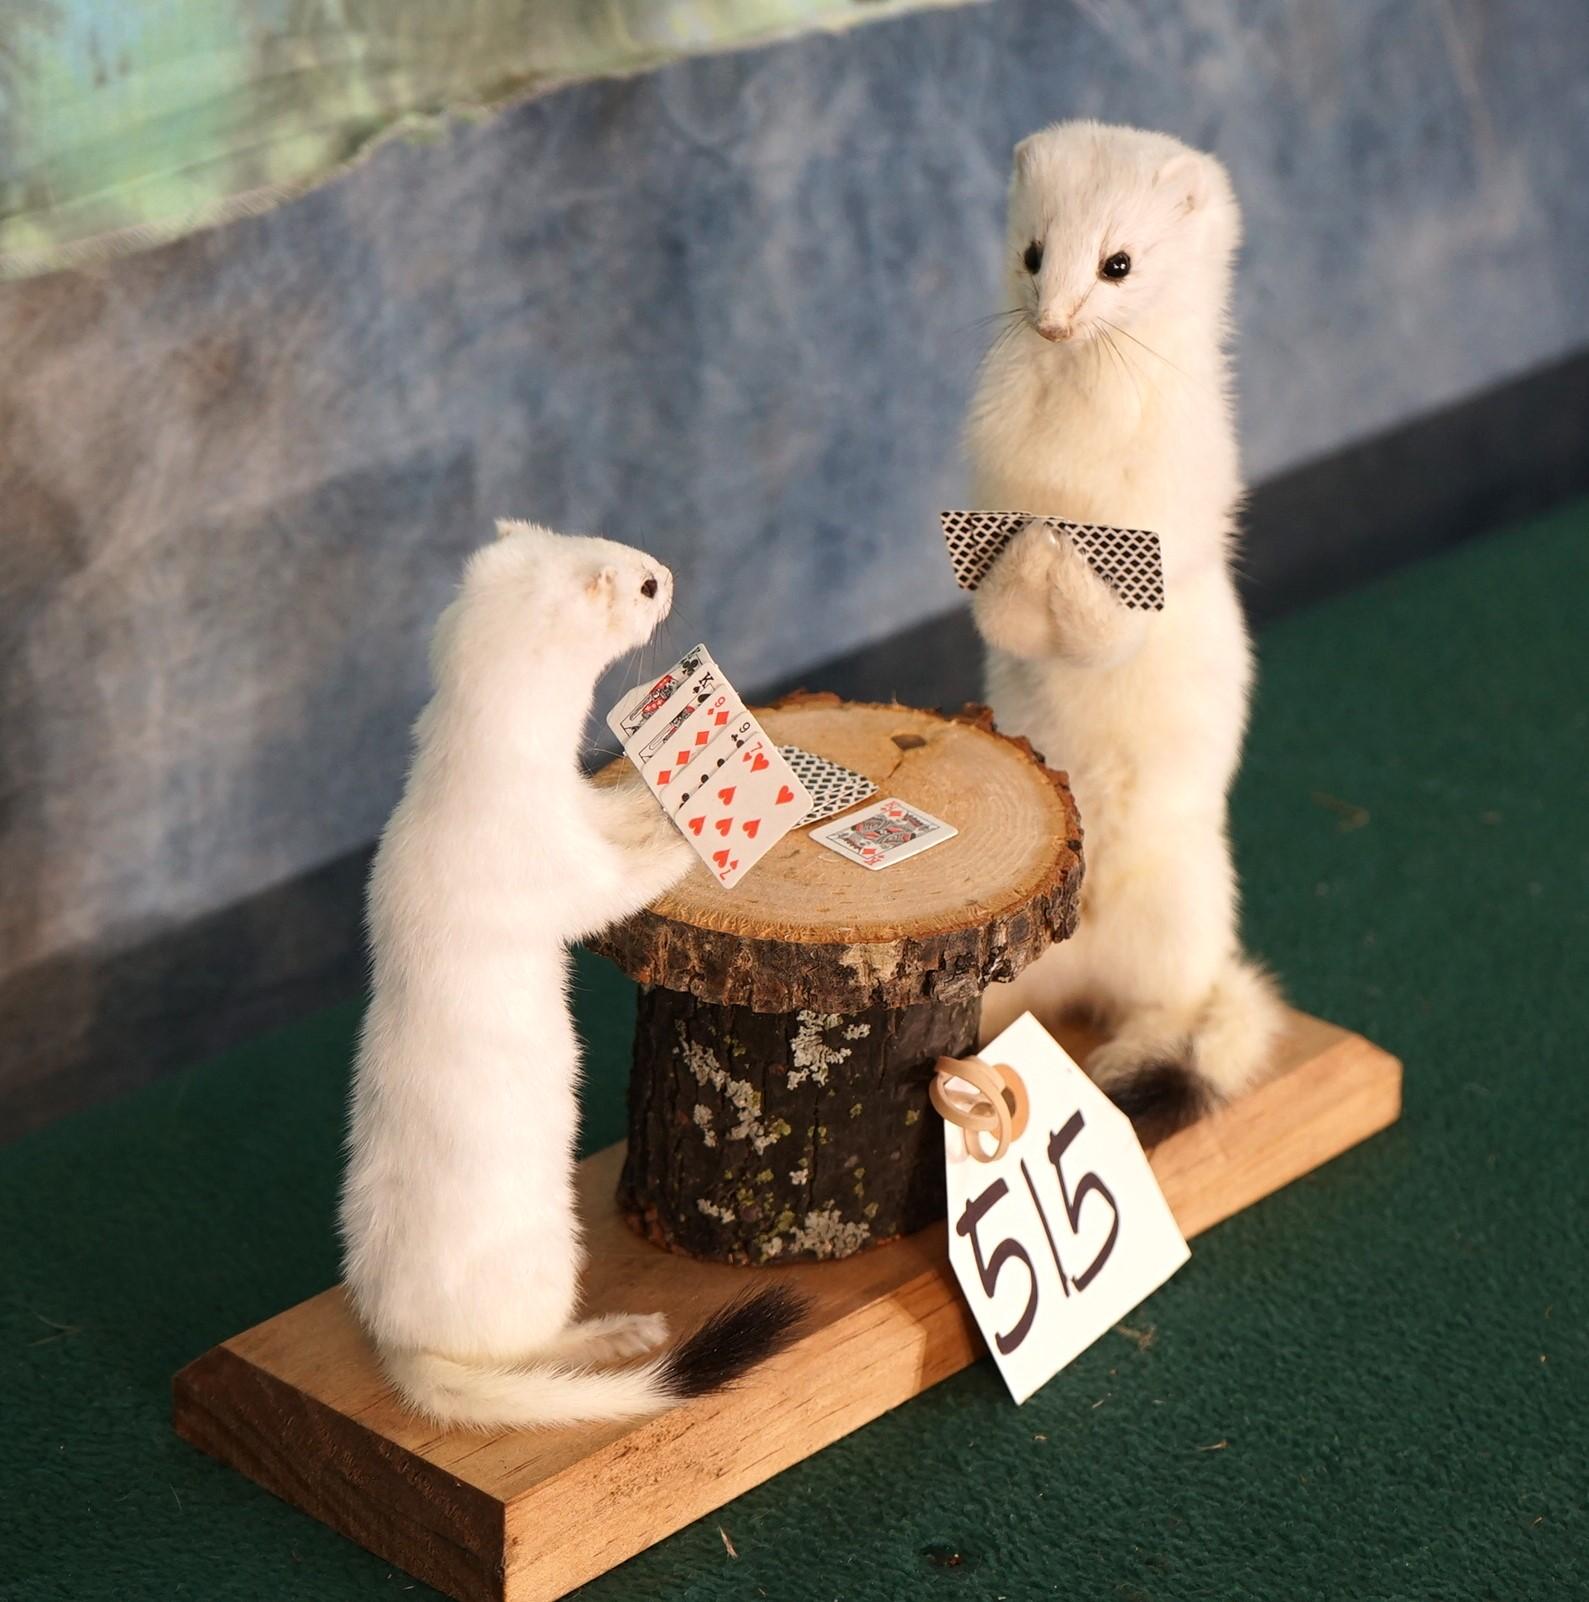 Two White Ermine Playing Poker Novelty Taxidermy Mount